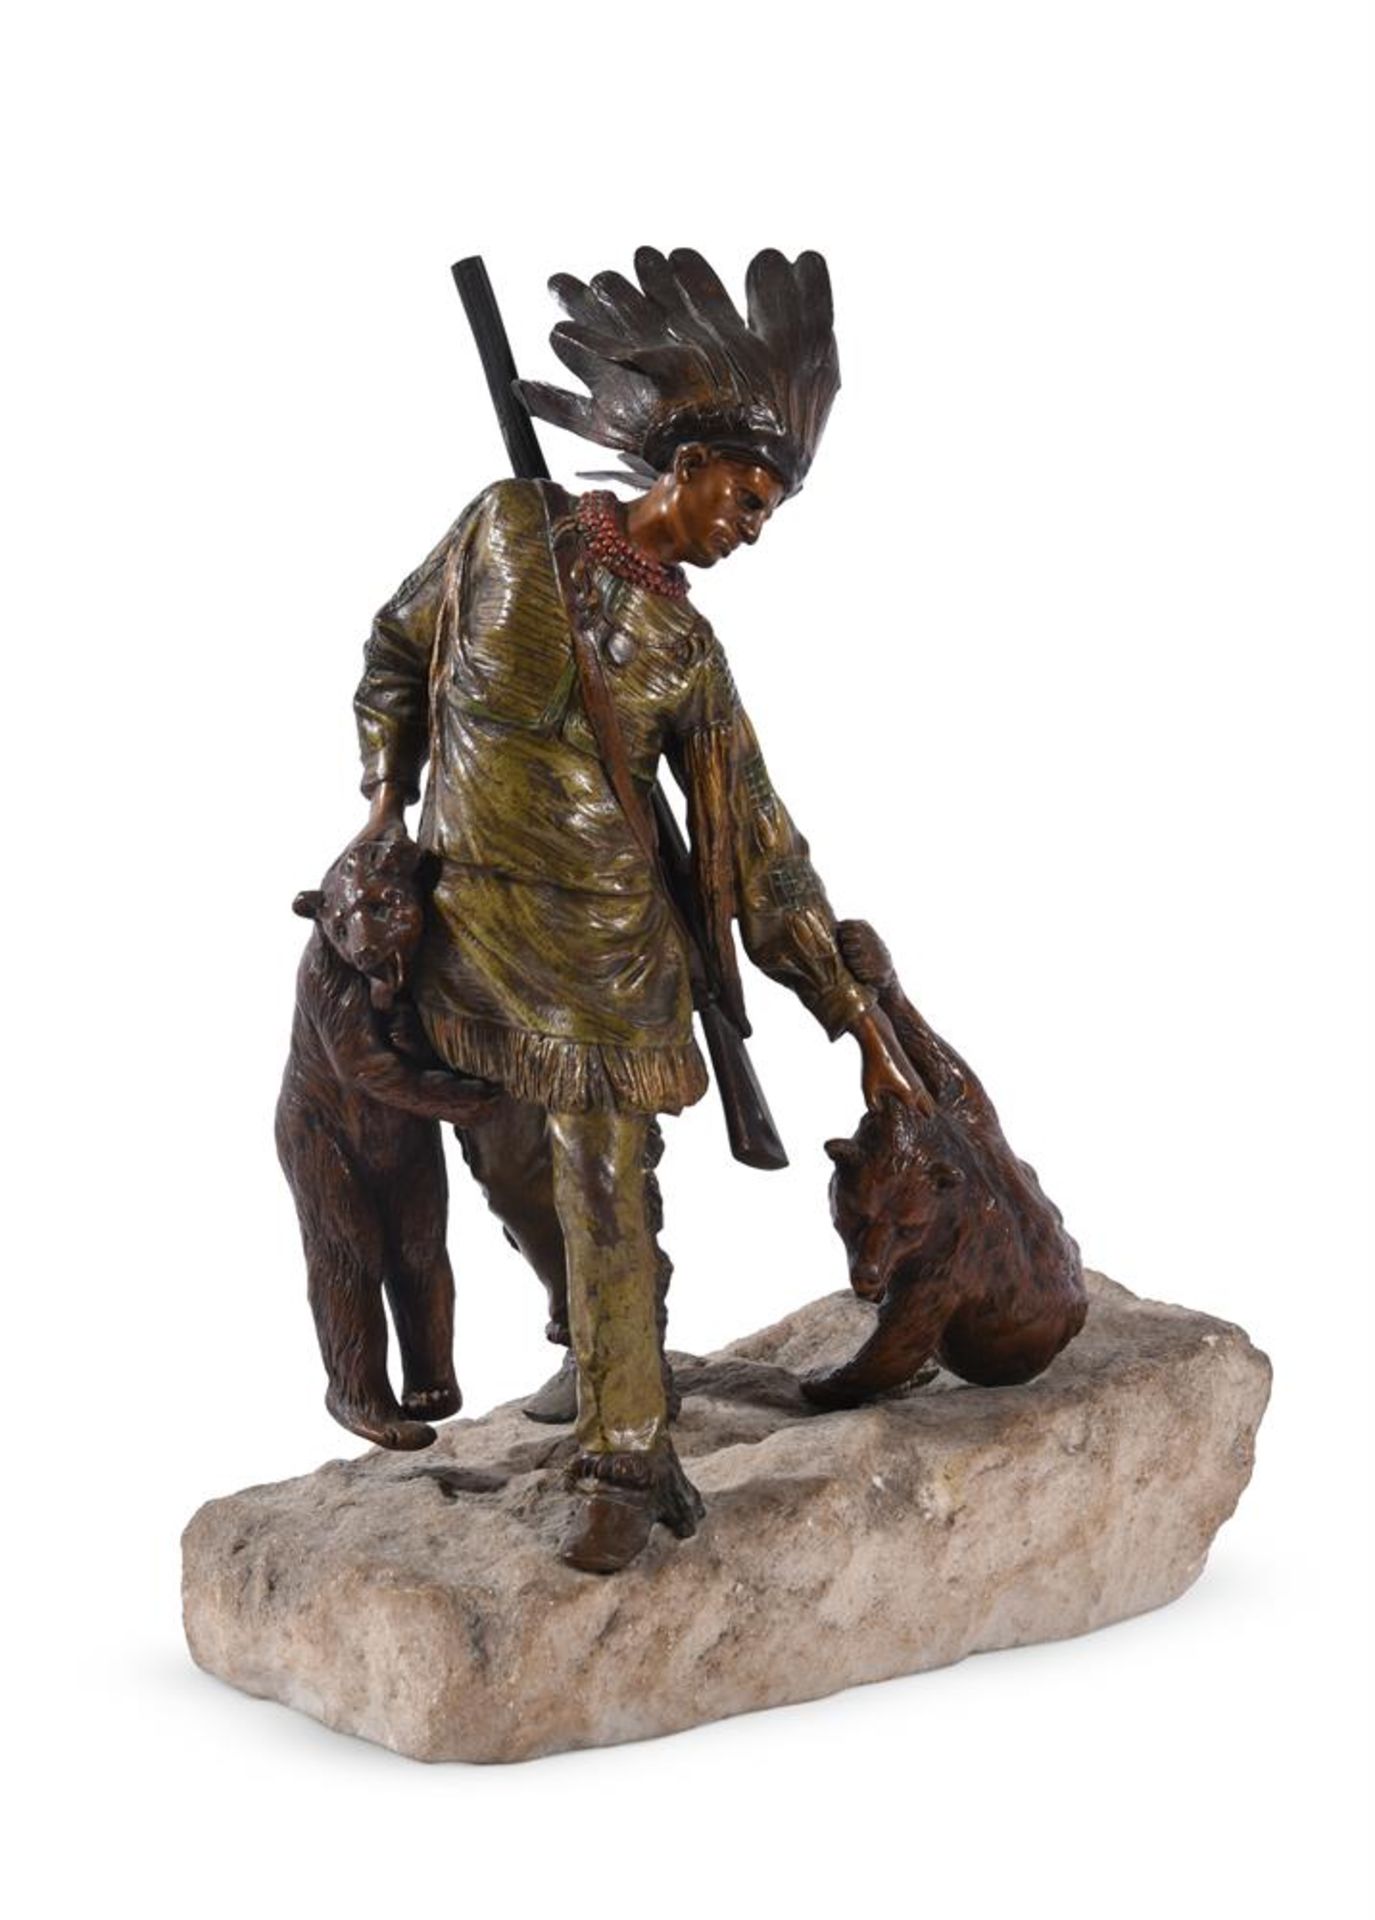 AN AUSTRIAN COLD PAINTED BRONZE MODEL OF A NATIVE AMERICAN HUNTER WITH TWO BEAR CUBS